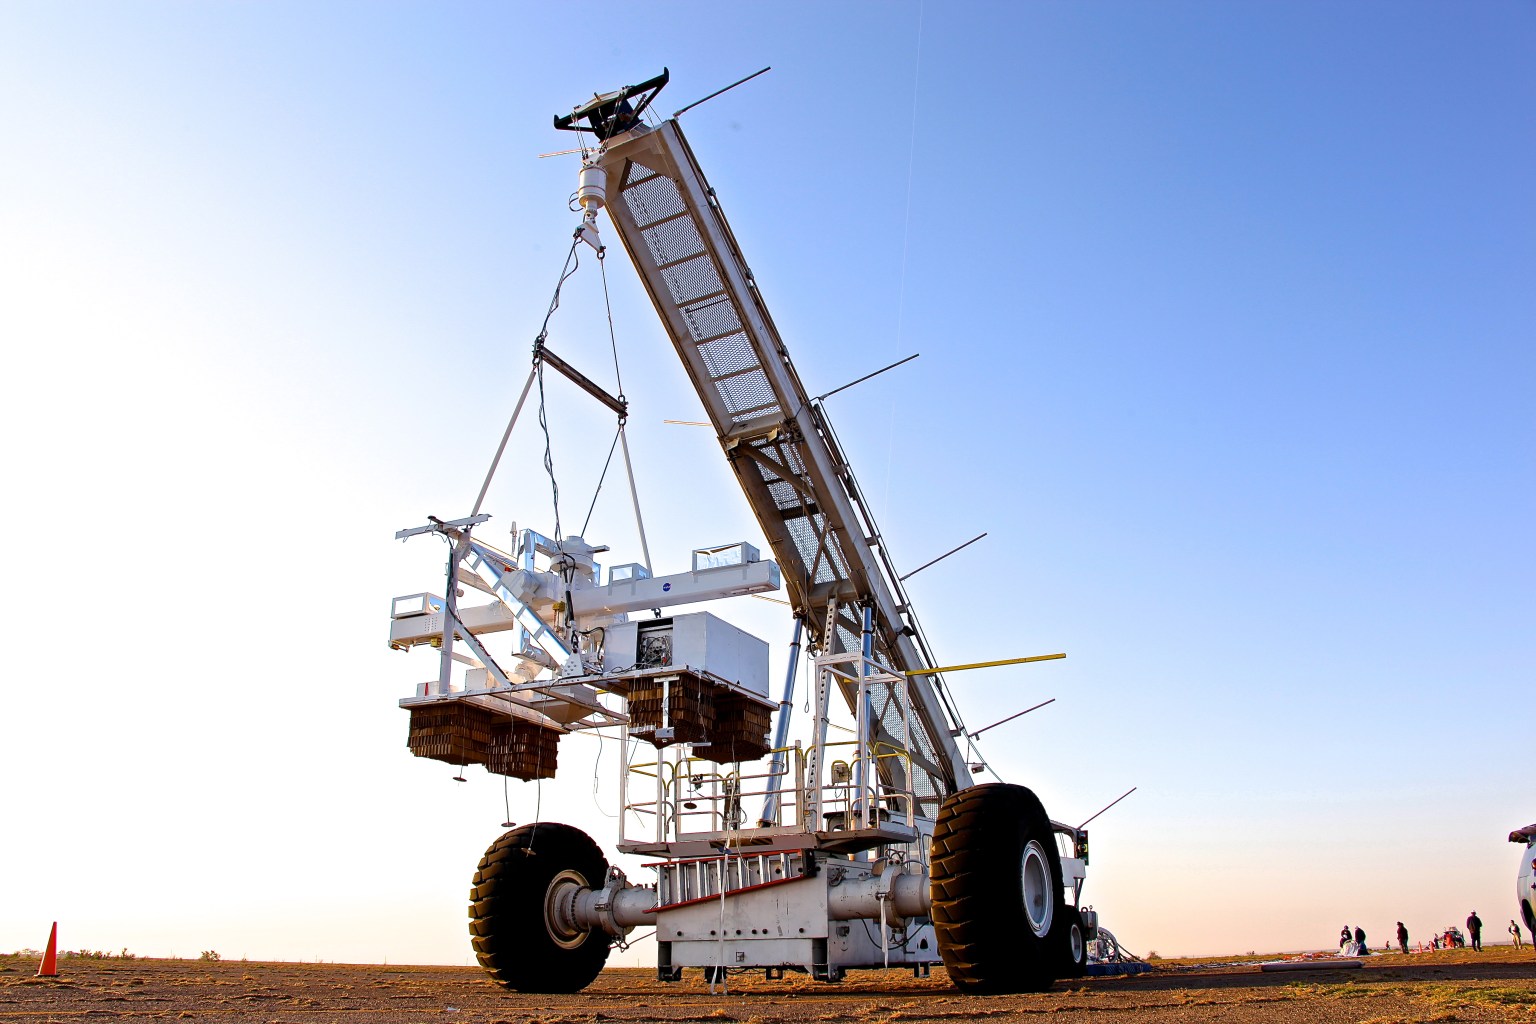 The WASP payload is supported by a crane prior to the balloon launch.